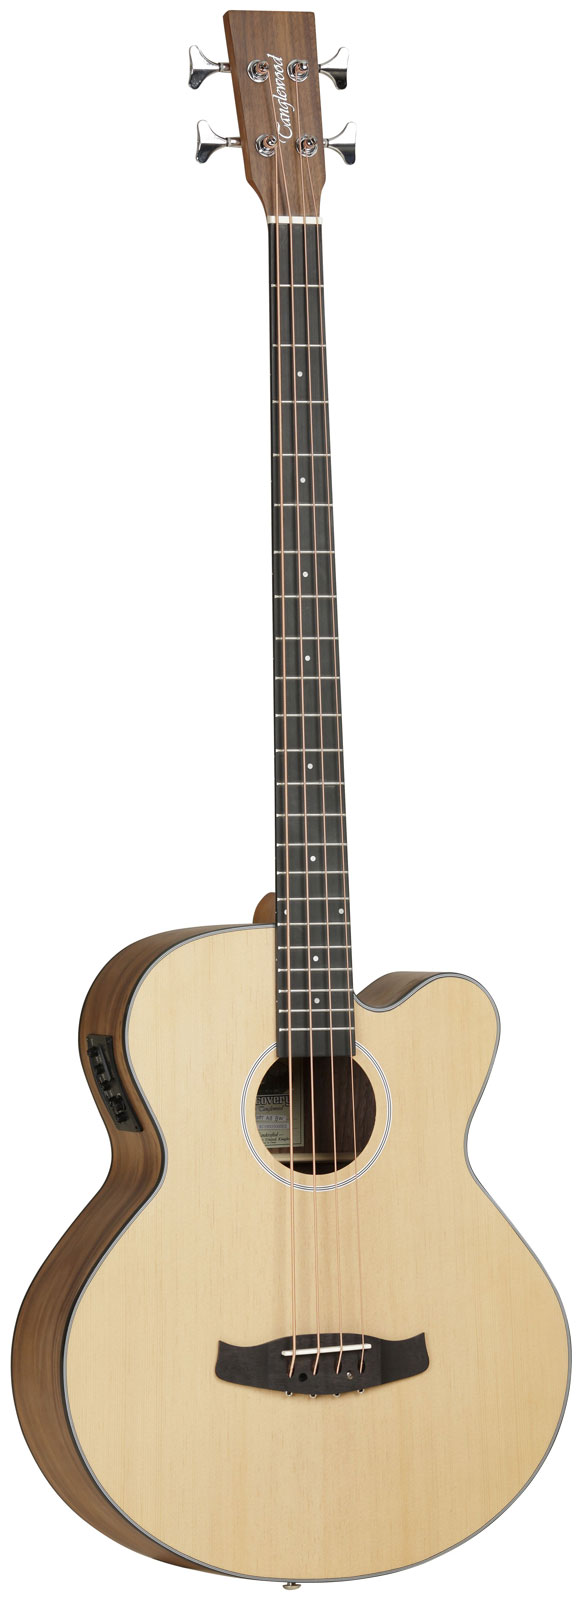 TANGLEWOOD DISCOVERY DBT AB BW NATURAL SATIN